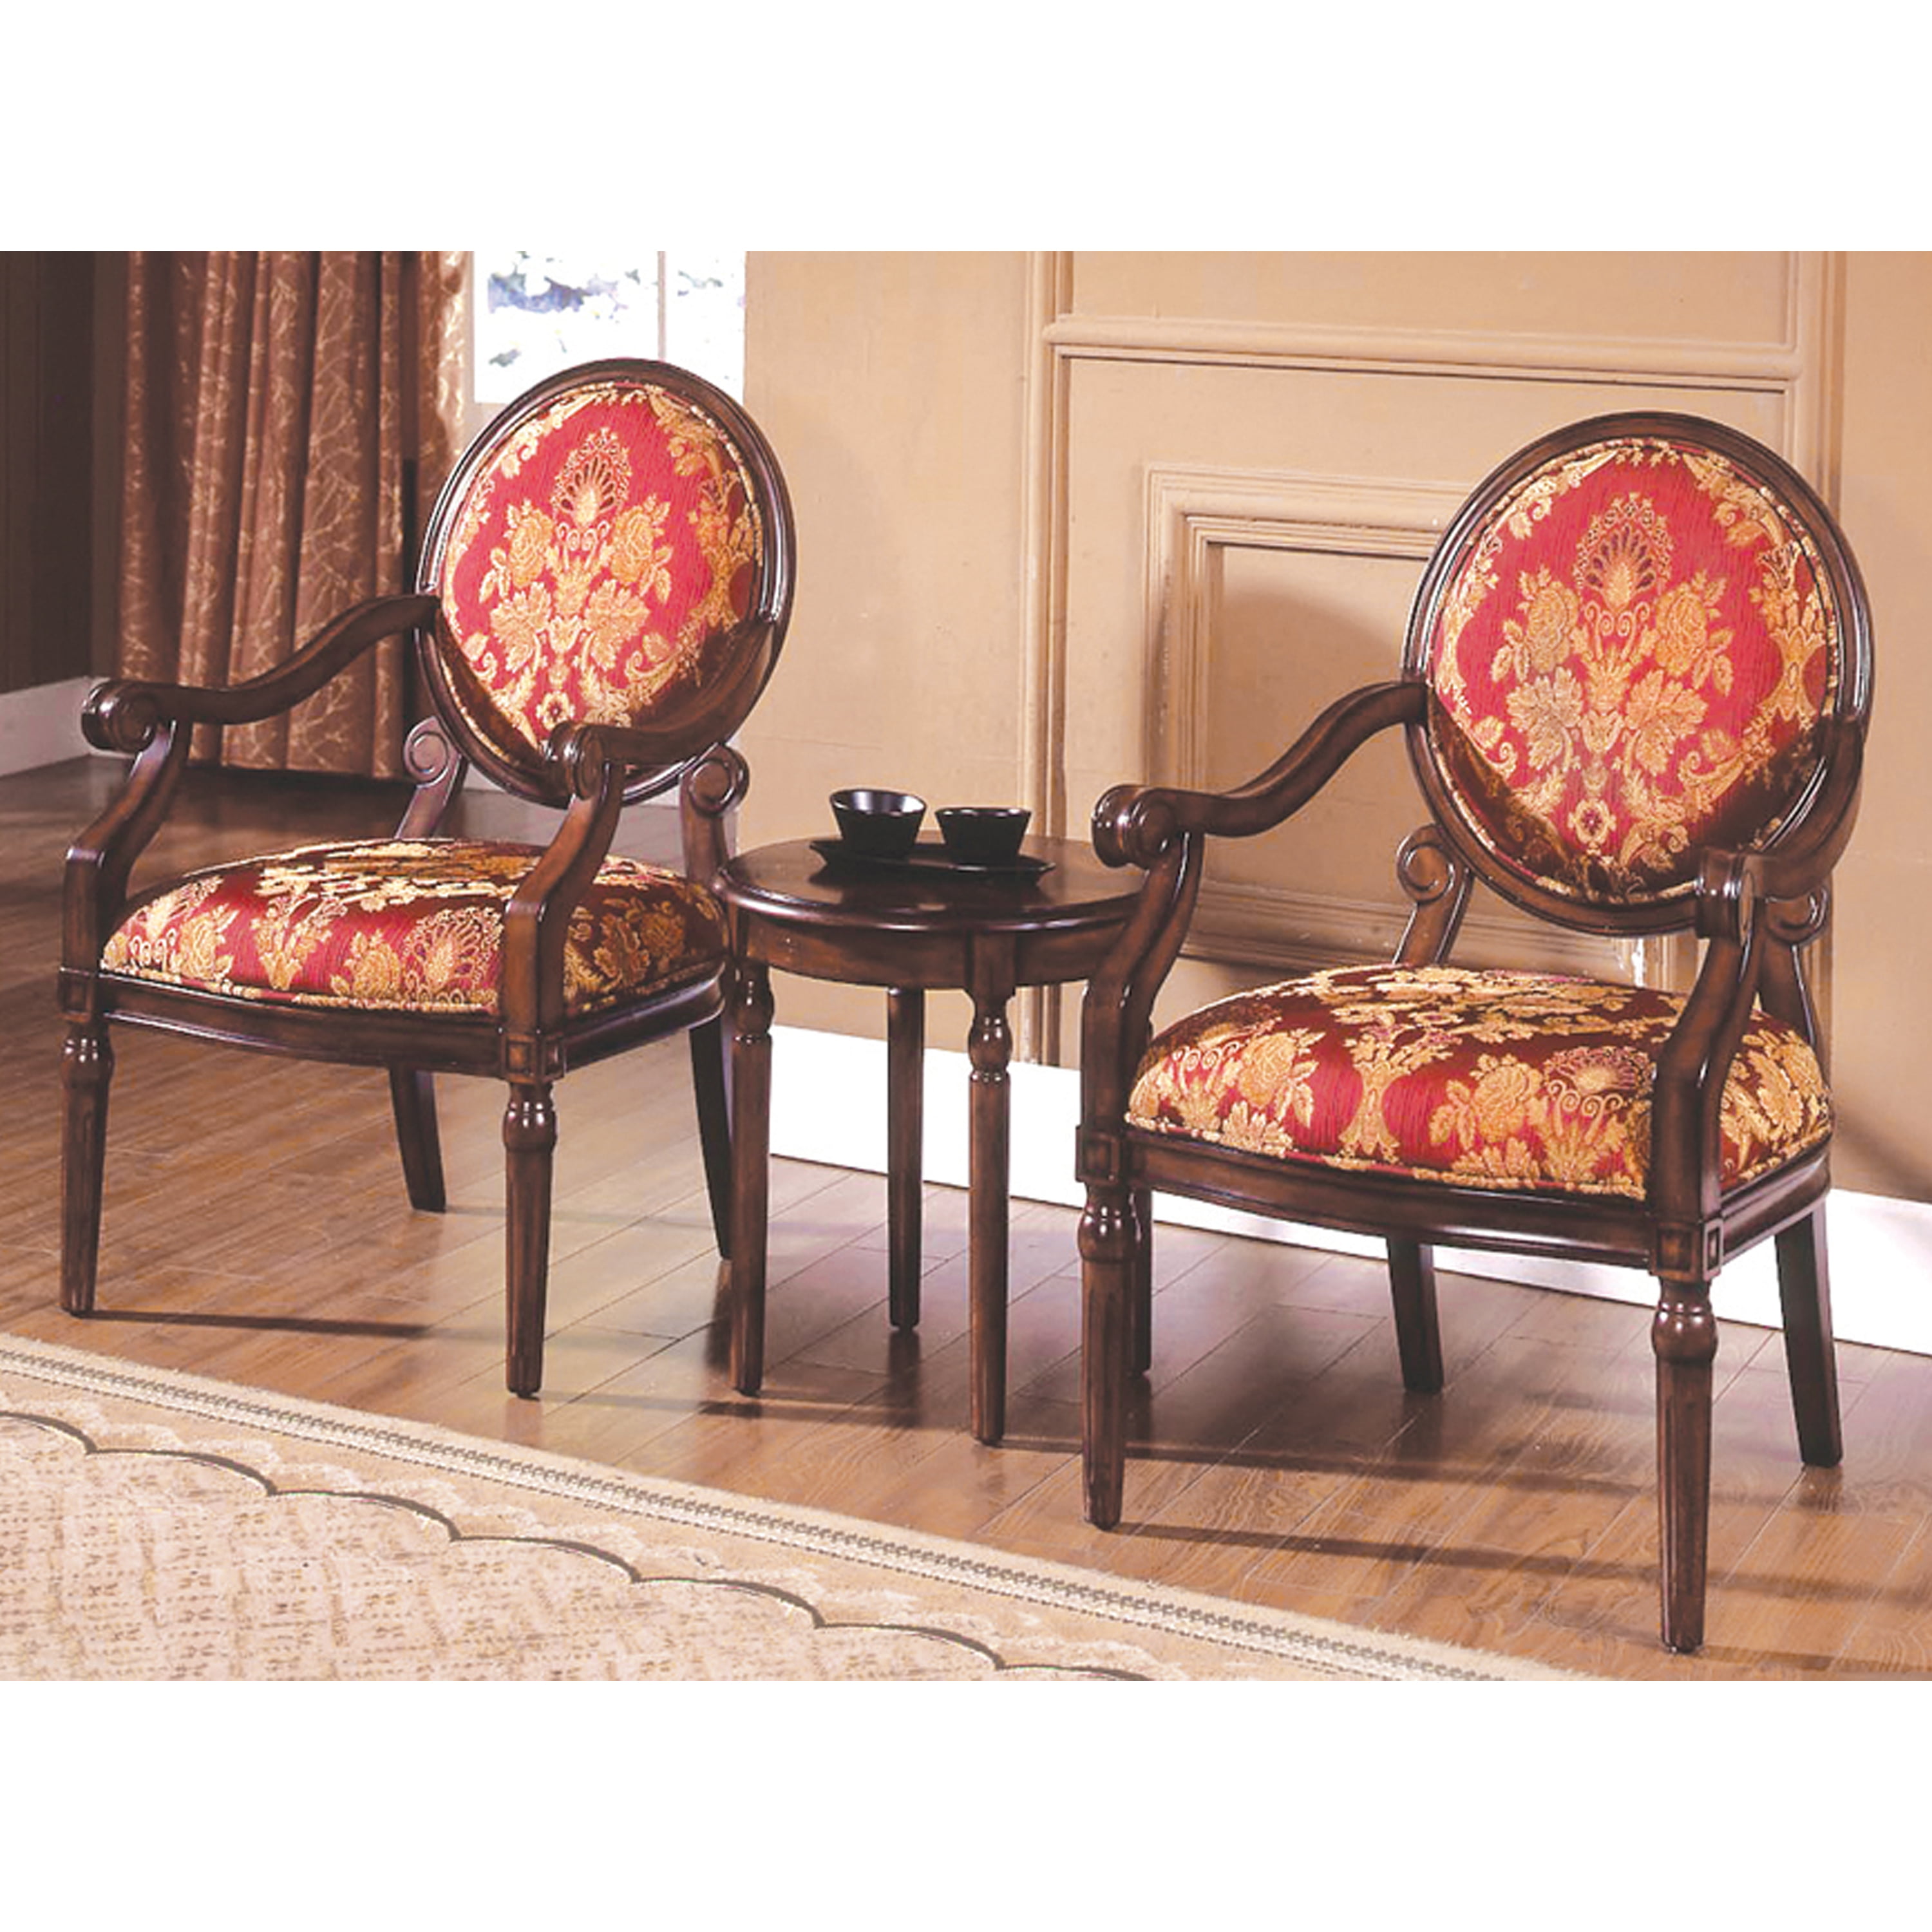 Best Master Furniture's Maddison 3-Piece Traditional Living Room Accent